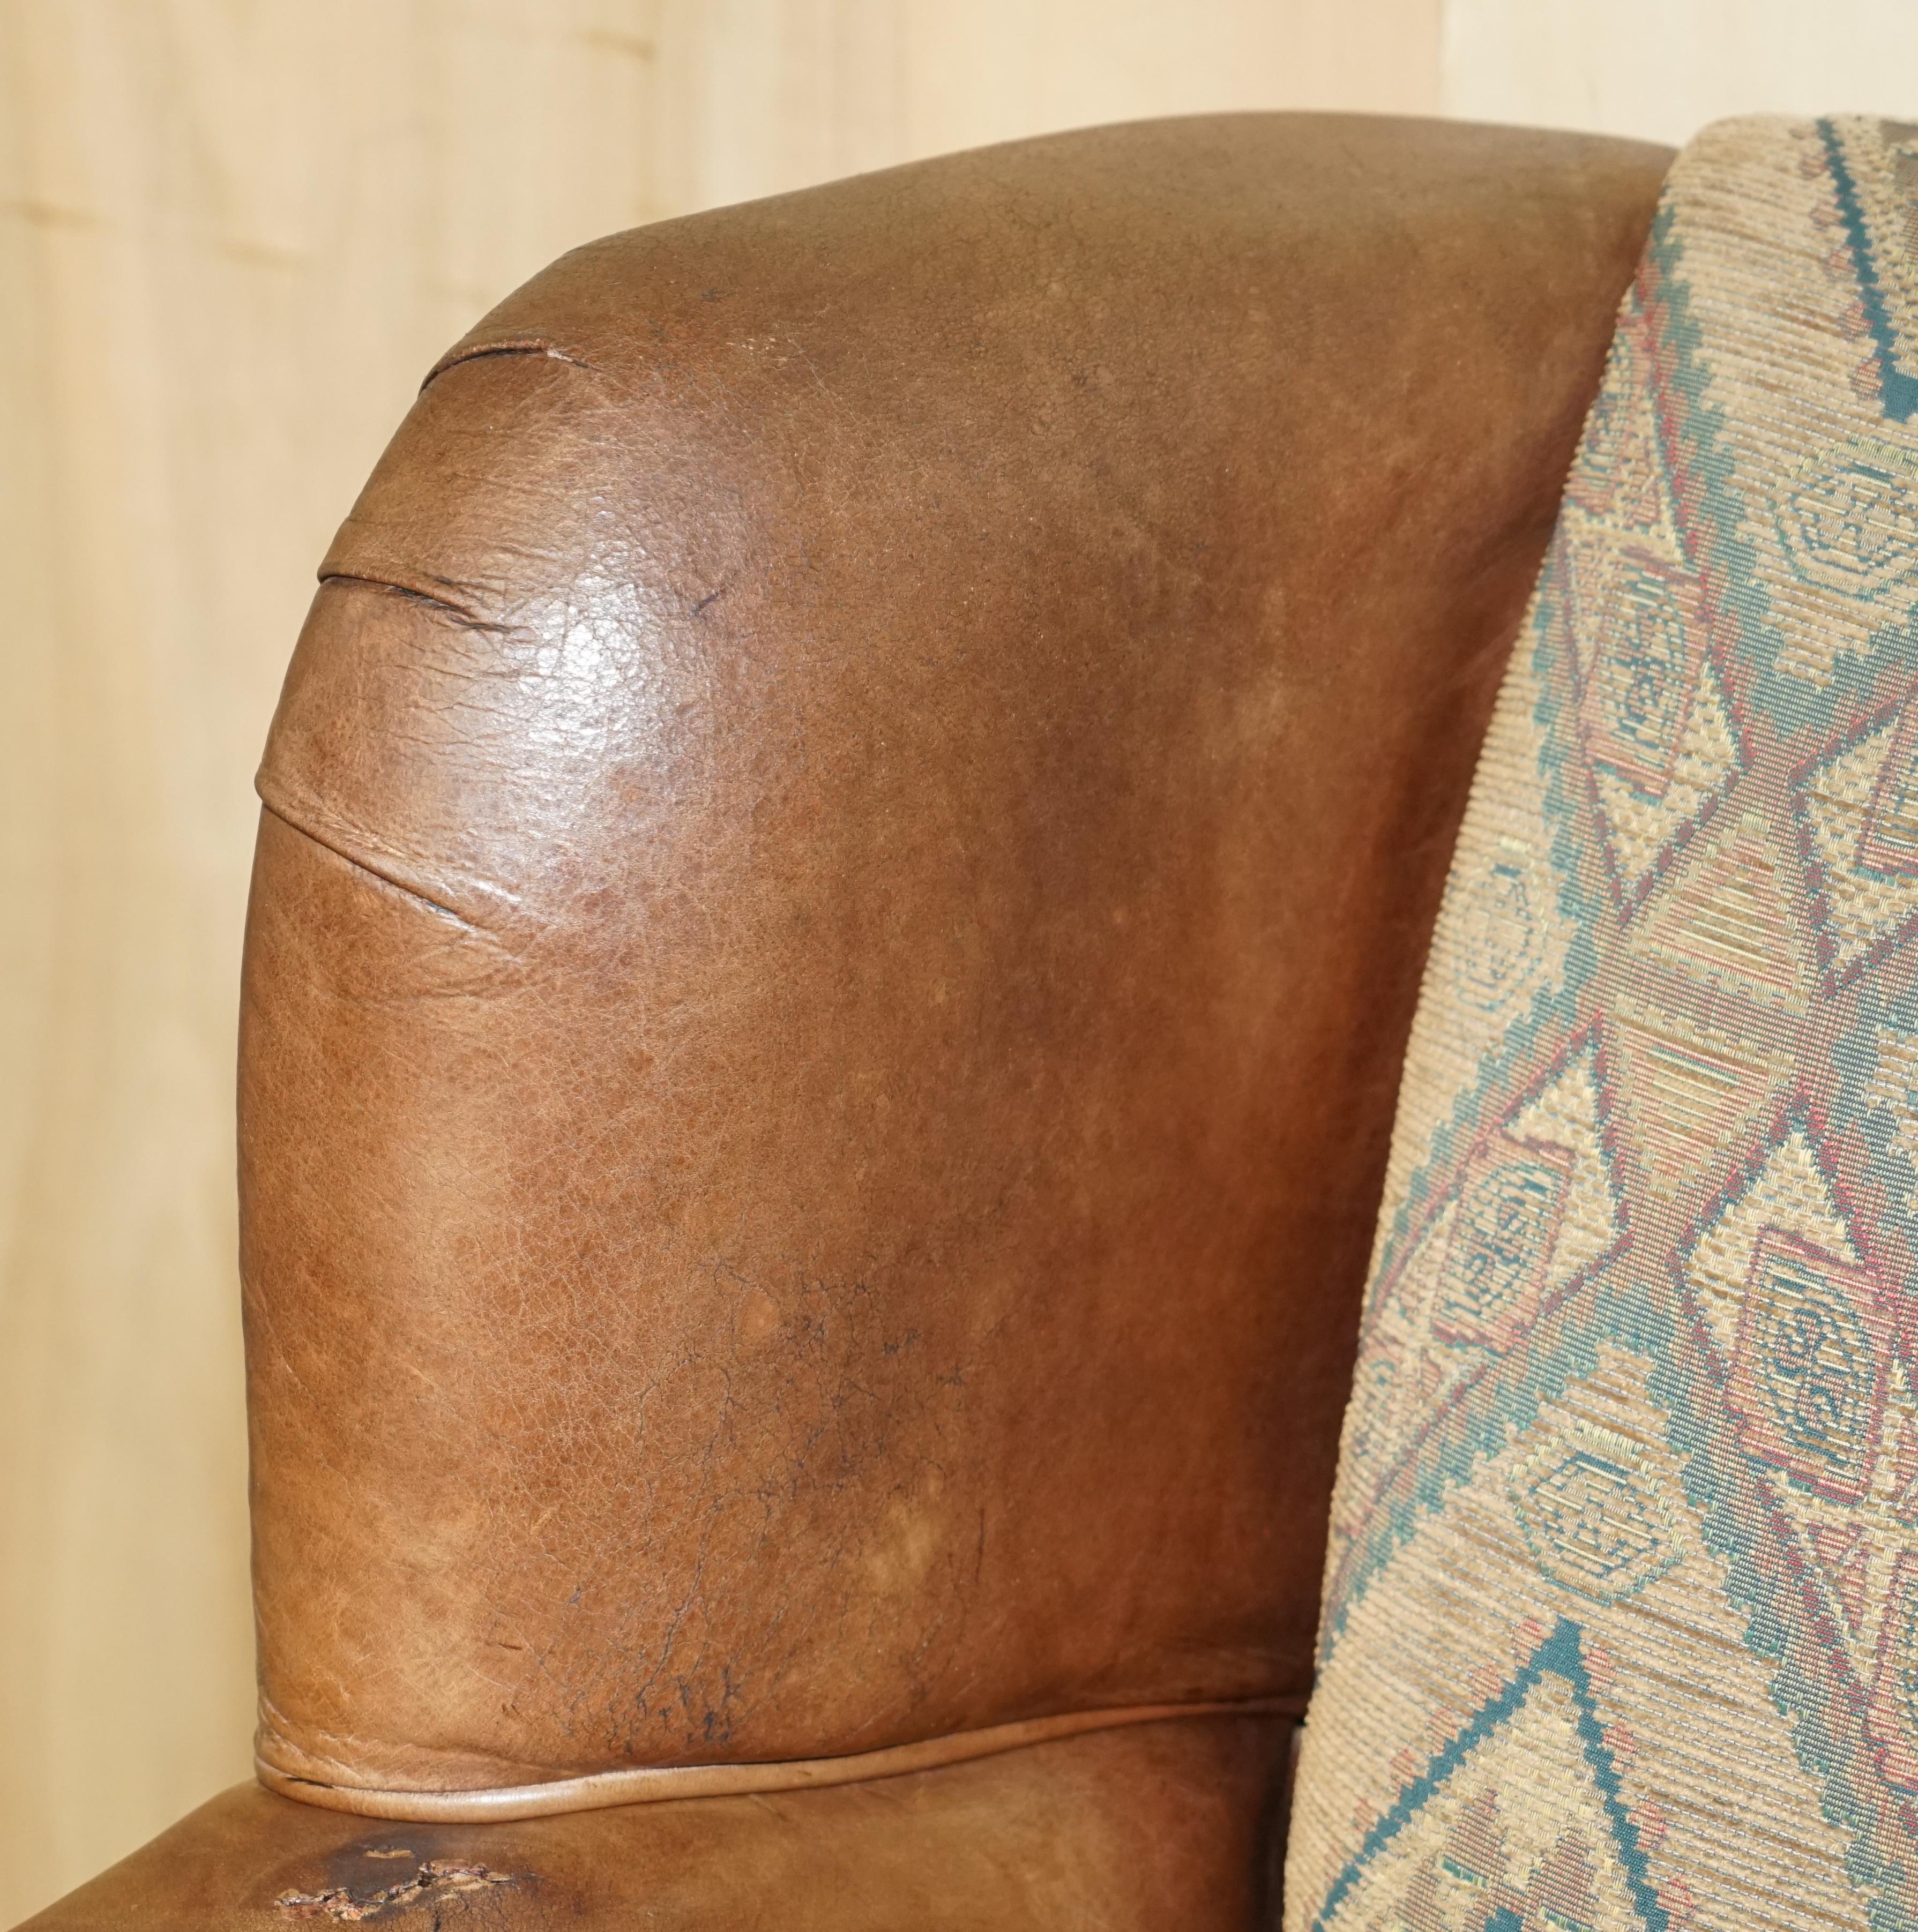 English PAIR OF ViNTAGE THOMAS LLOYD BROWN LEATHER KILIM ARMCHAIRS FROM SCOTTISH CASTLe